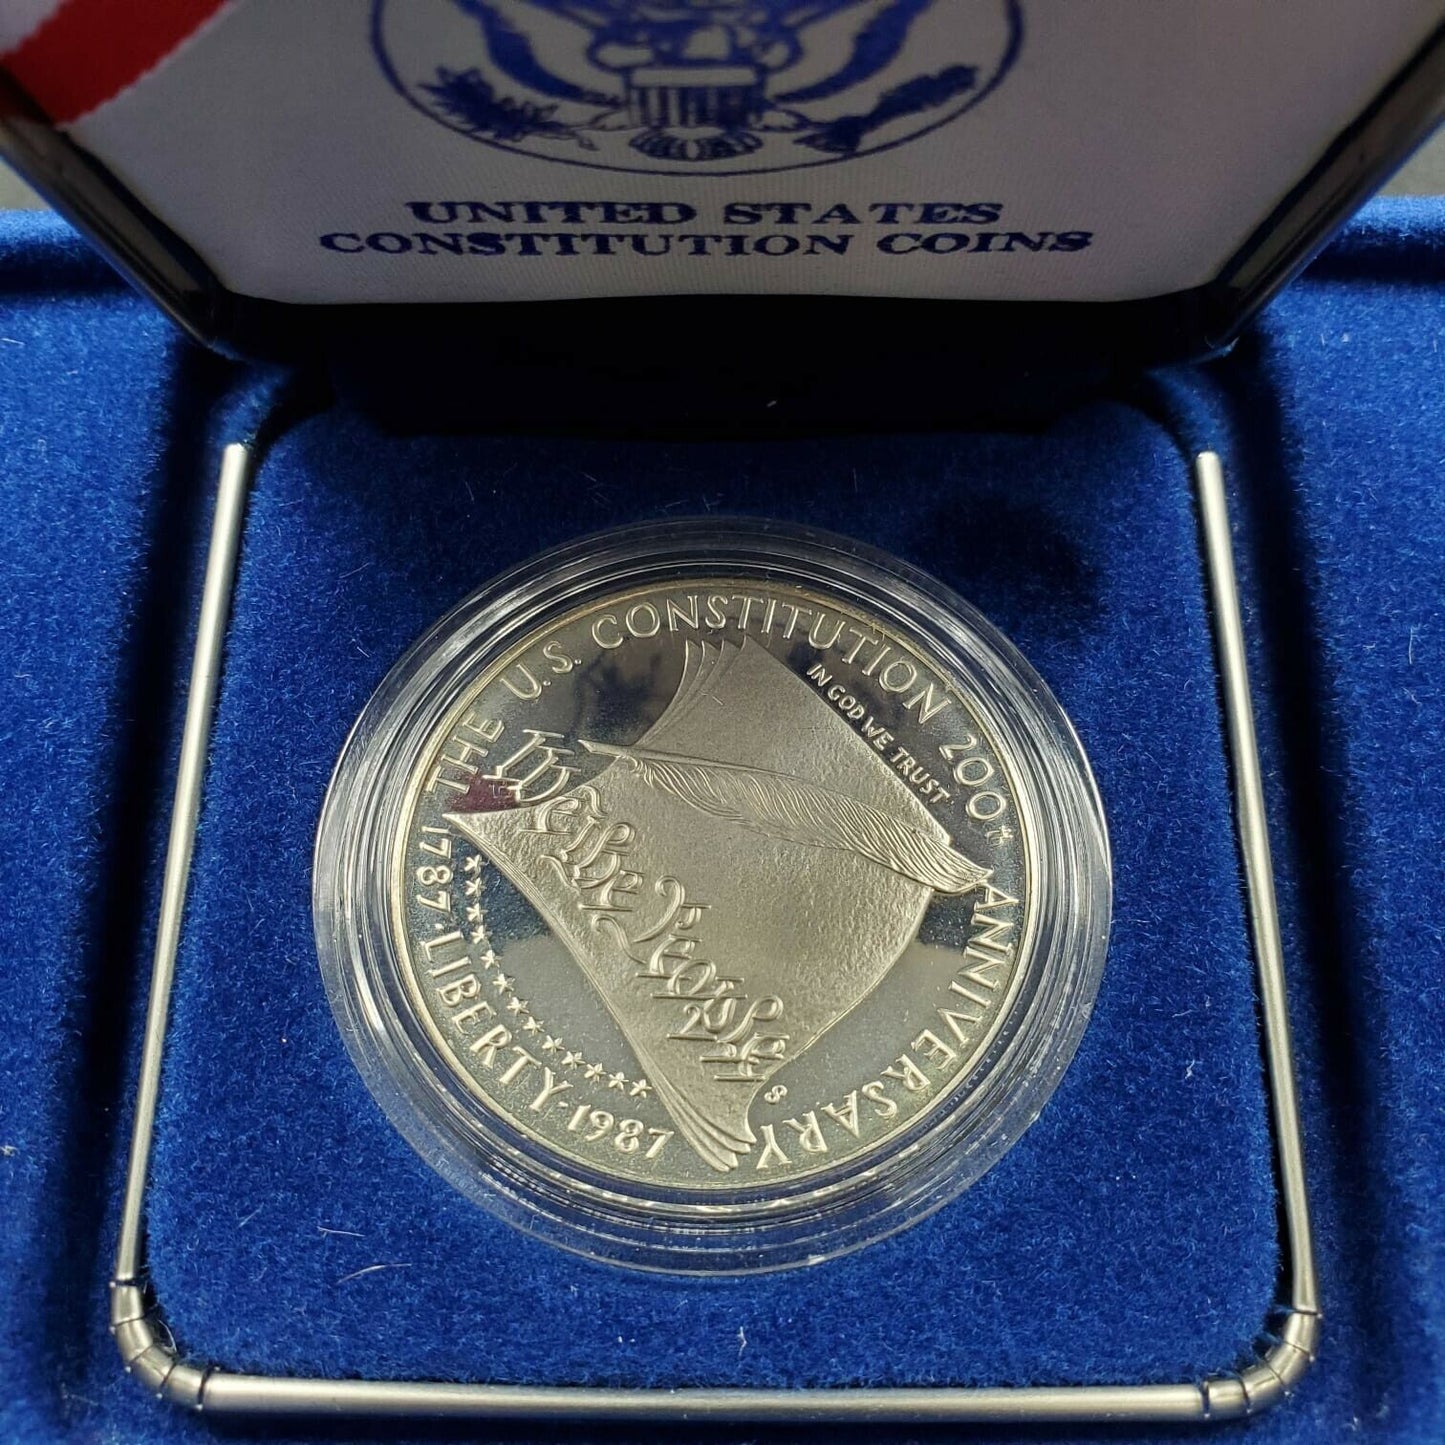 1987 Constitution Commemorative Proof Silver Dollar Coin OGP